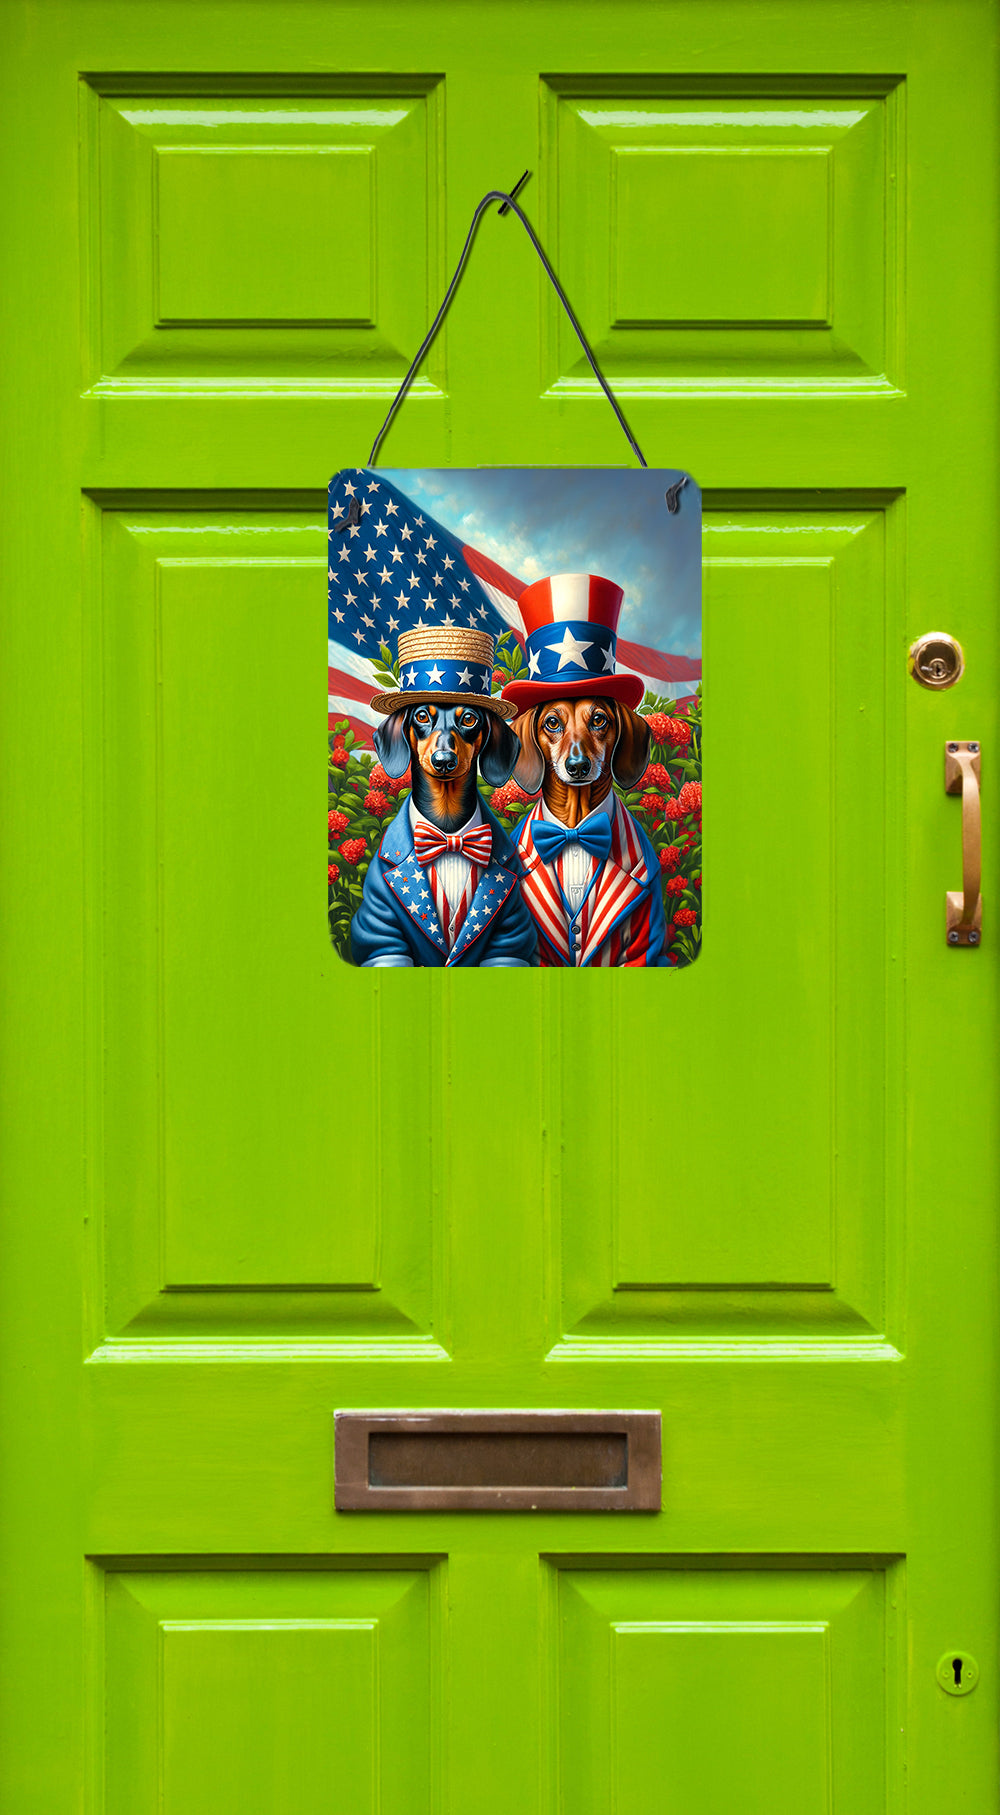 Buy this All American Dachshund Wall or Door Hanging Prints